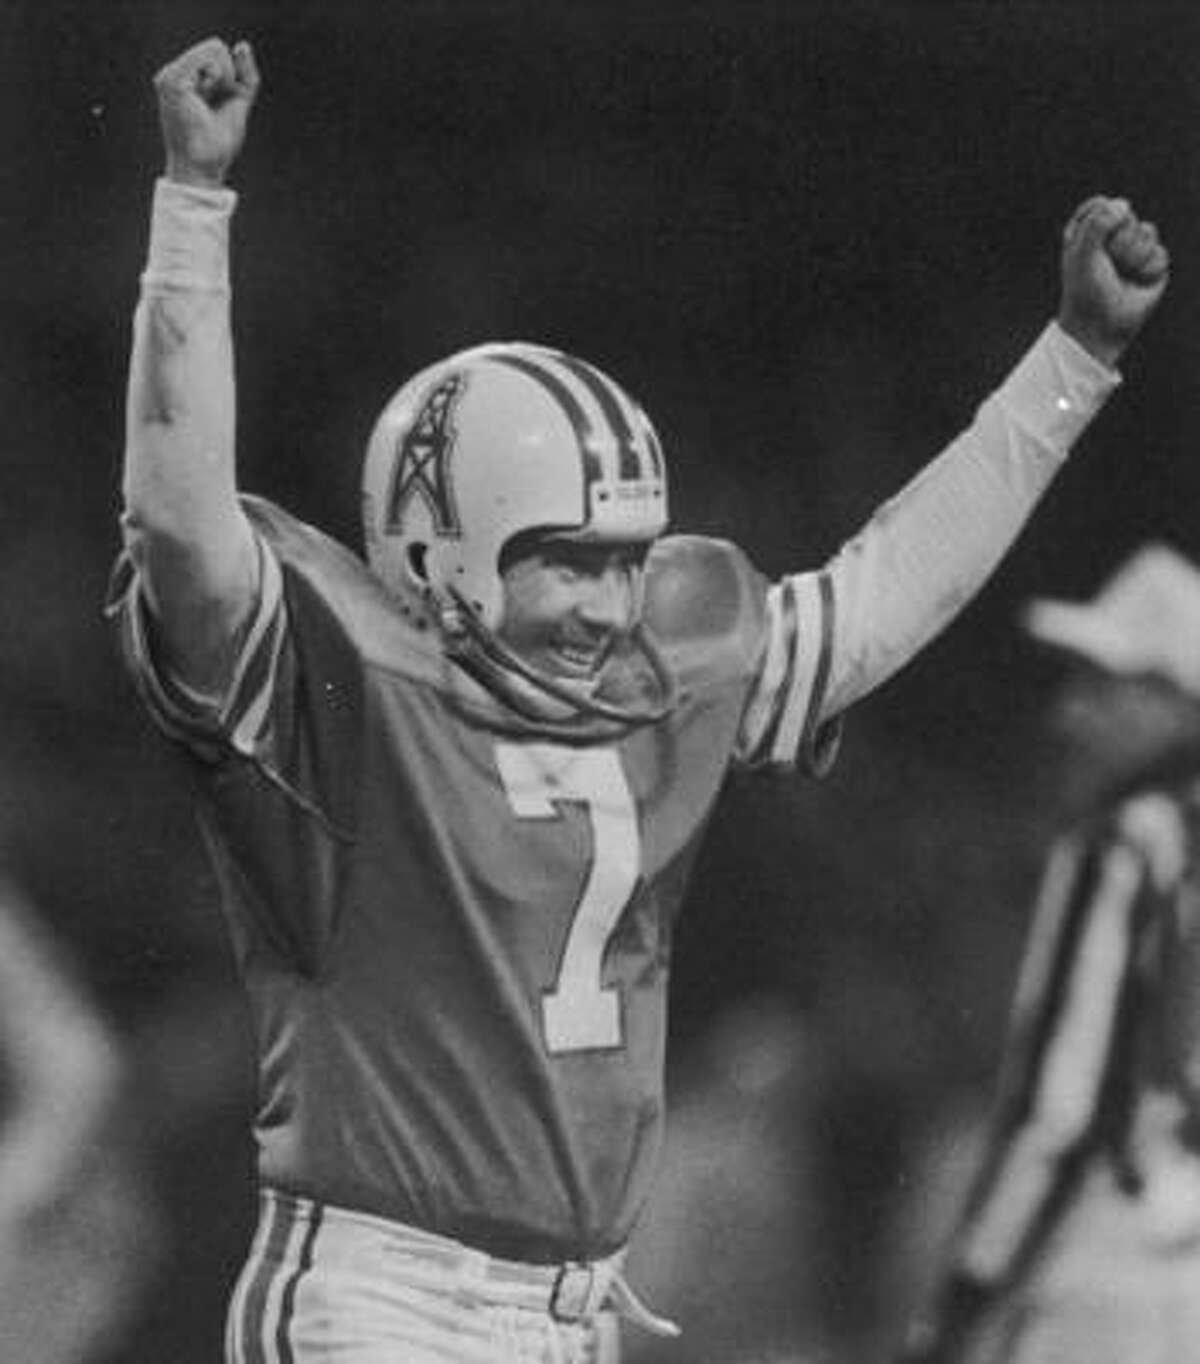 1987: Oilers 23, Seahawks 20 (OT) Warren Moon threw for 273 yards and a touchdown in his first playoff game, and Tony Zendejas made a 42-yard field goal with 7:55 left in overtime. The Seahawks had tied the score with just 26 seconds left in regulation on Dave Krieg’s 12-yard TD pass to Steve Largent.